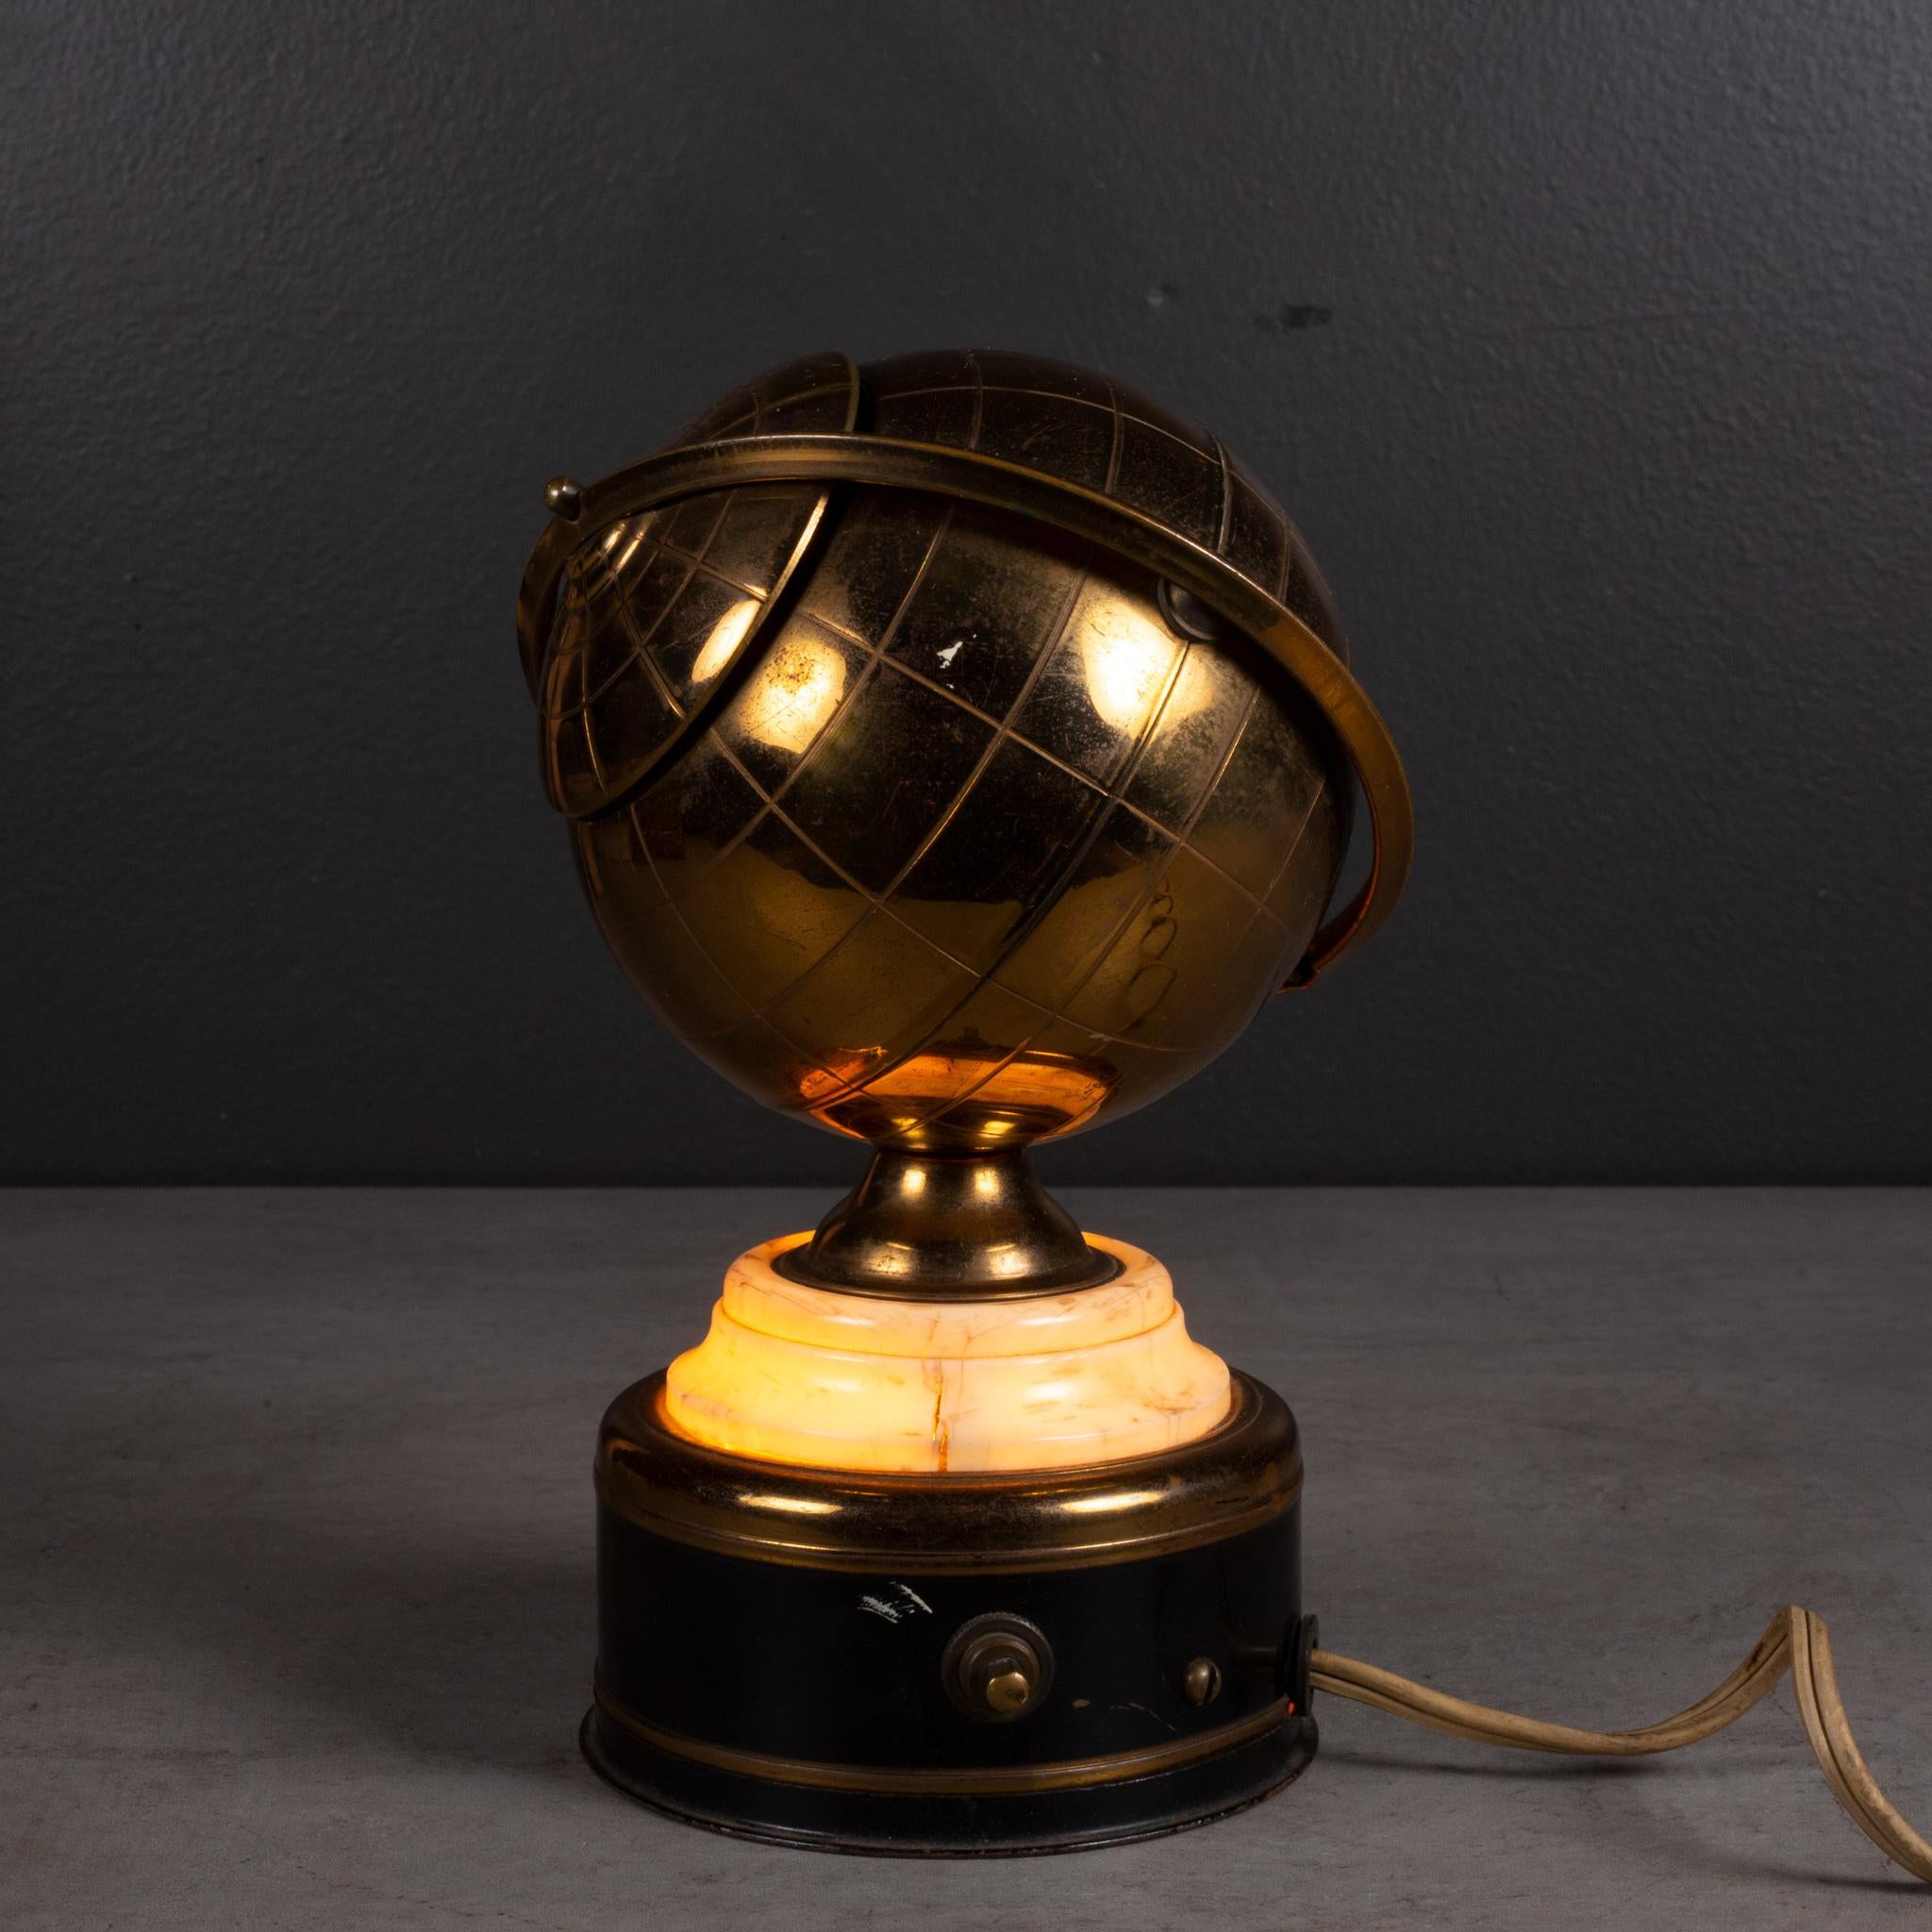 ABOUT 

An original mid-century brass globe cigarette holder with lighted Bakelite and metal base. The lid slides open on the globe's axis to reveal a metal interior designed to hold cigarettes. This piece has retained its original finish and light